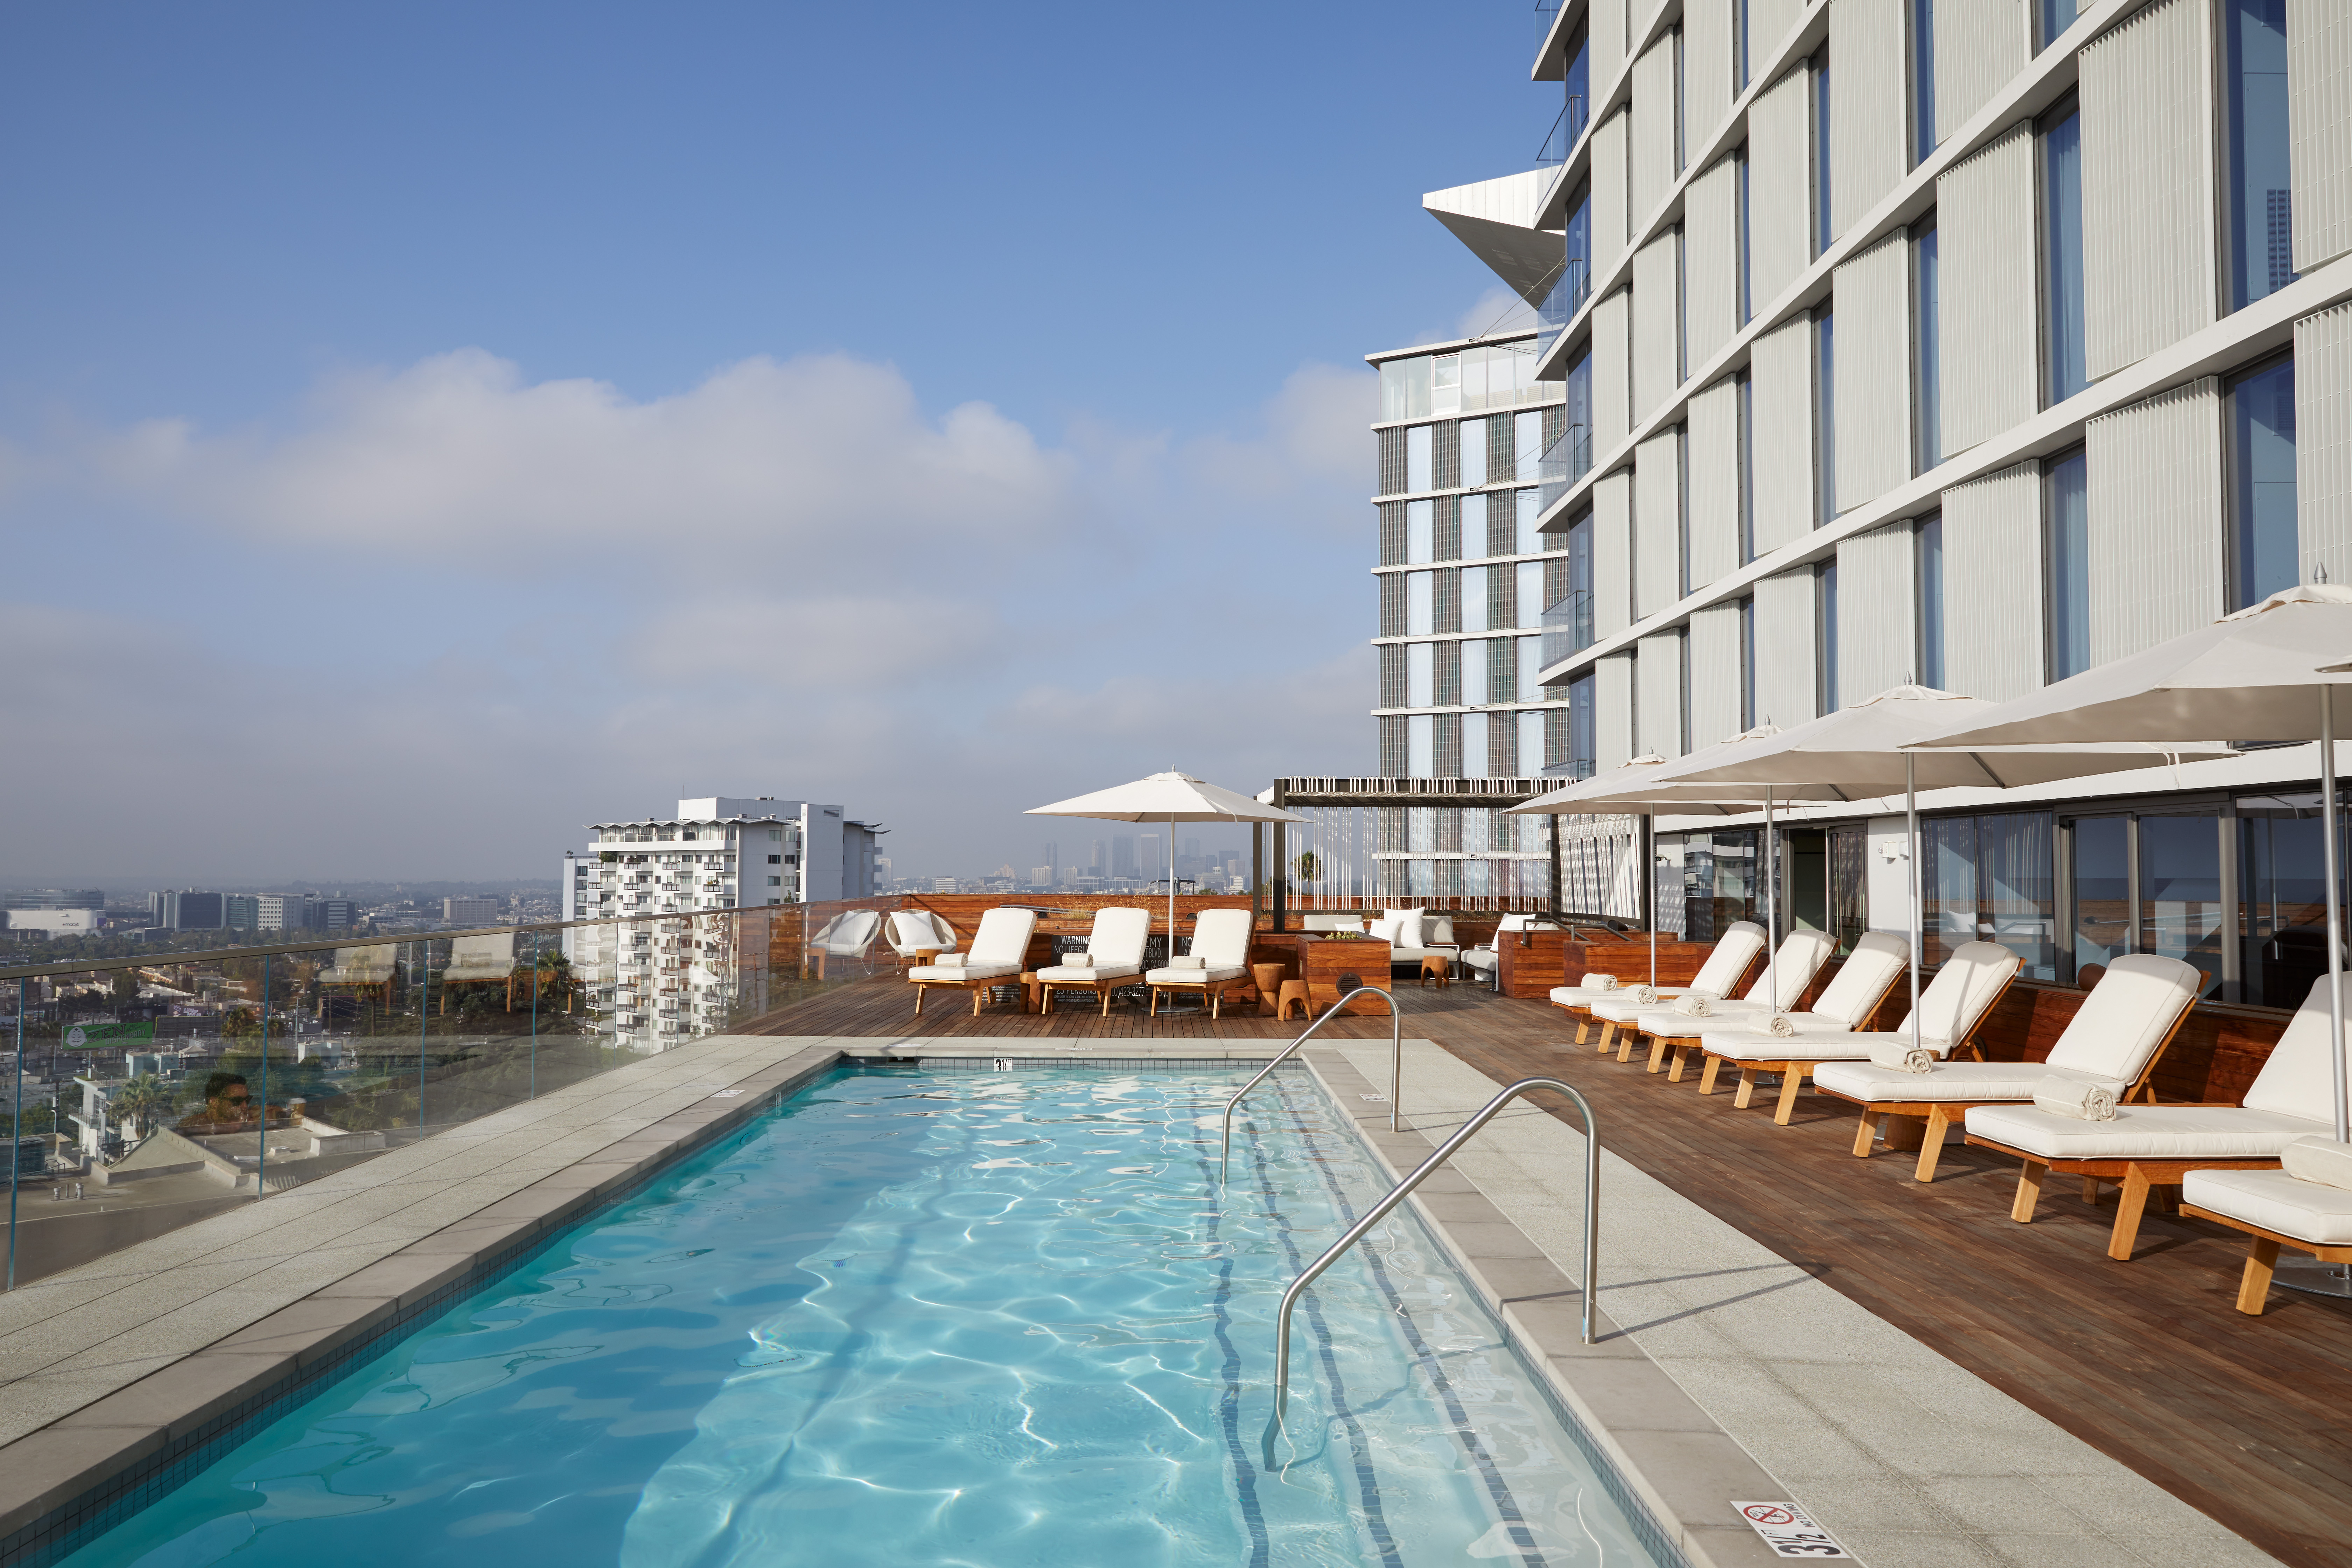 New Kids On The Sunset Strip: The Jeremy West Hollywood Hotel